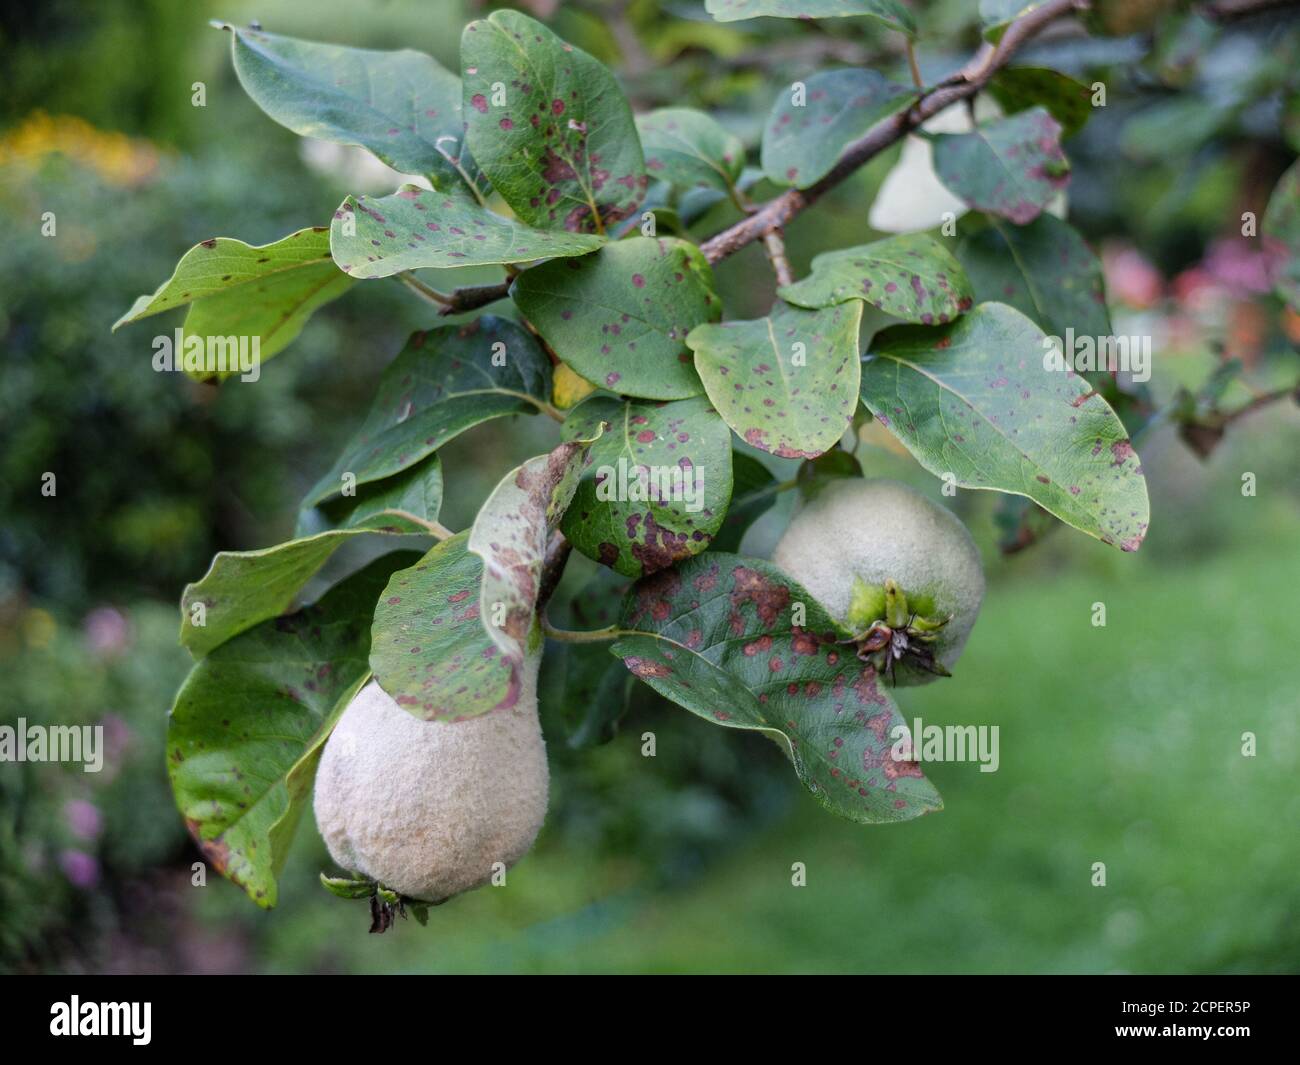 Quince leaves (Cydonia oblonga) infested with leaf tan (Diplocaron mespili) Stock Photo